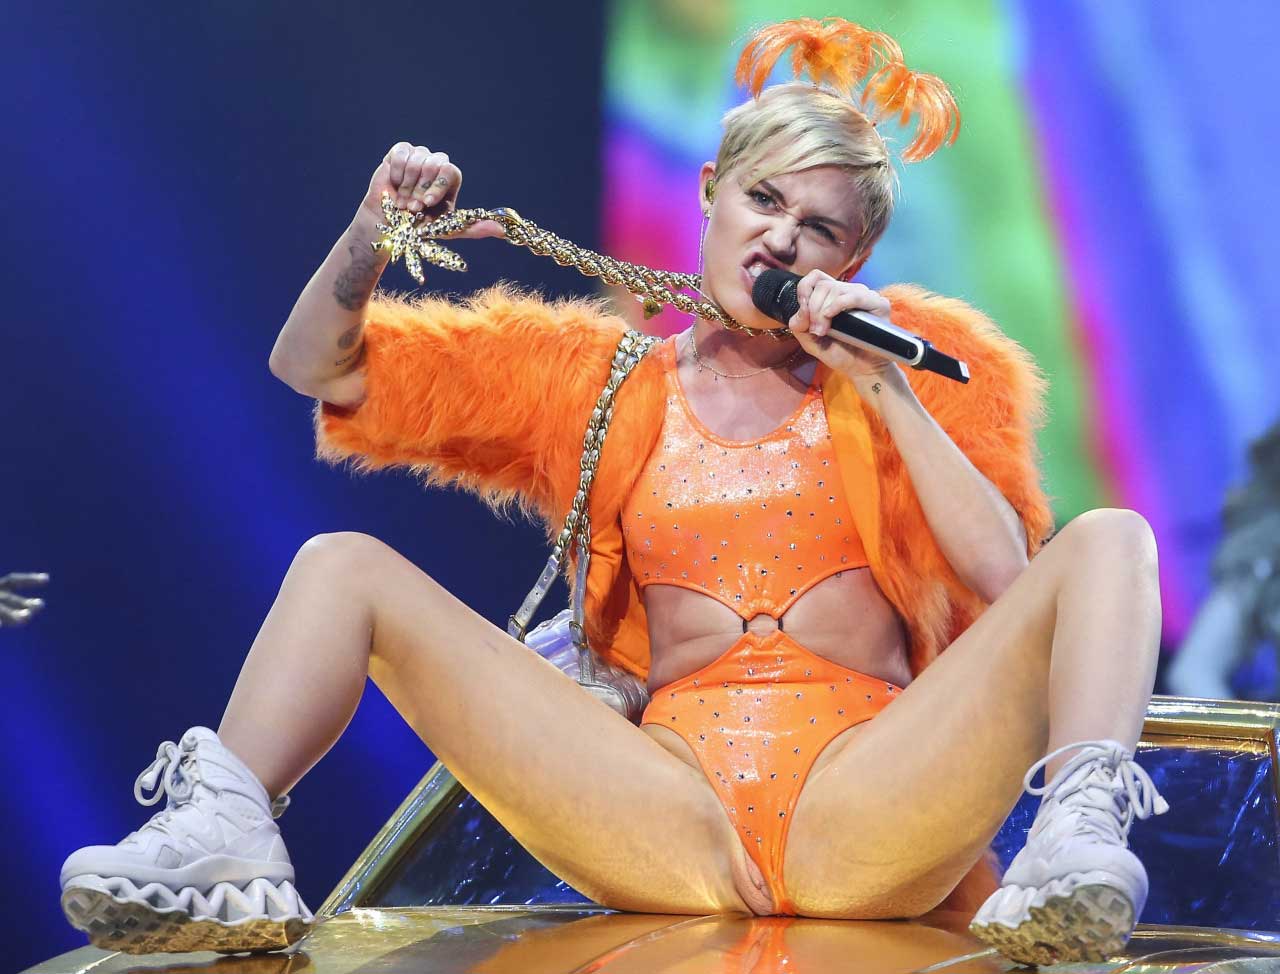 Miley Cyrus on stage wearing an orange body suite legs spread